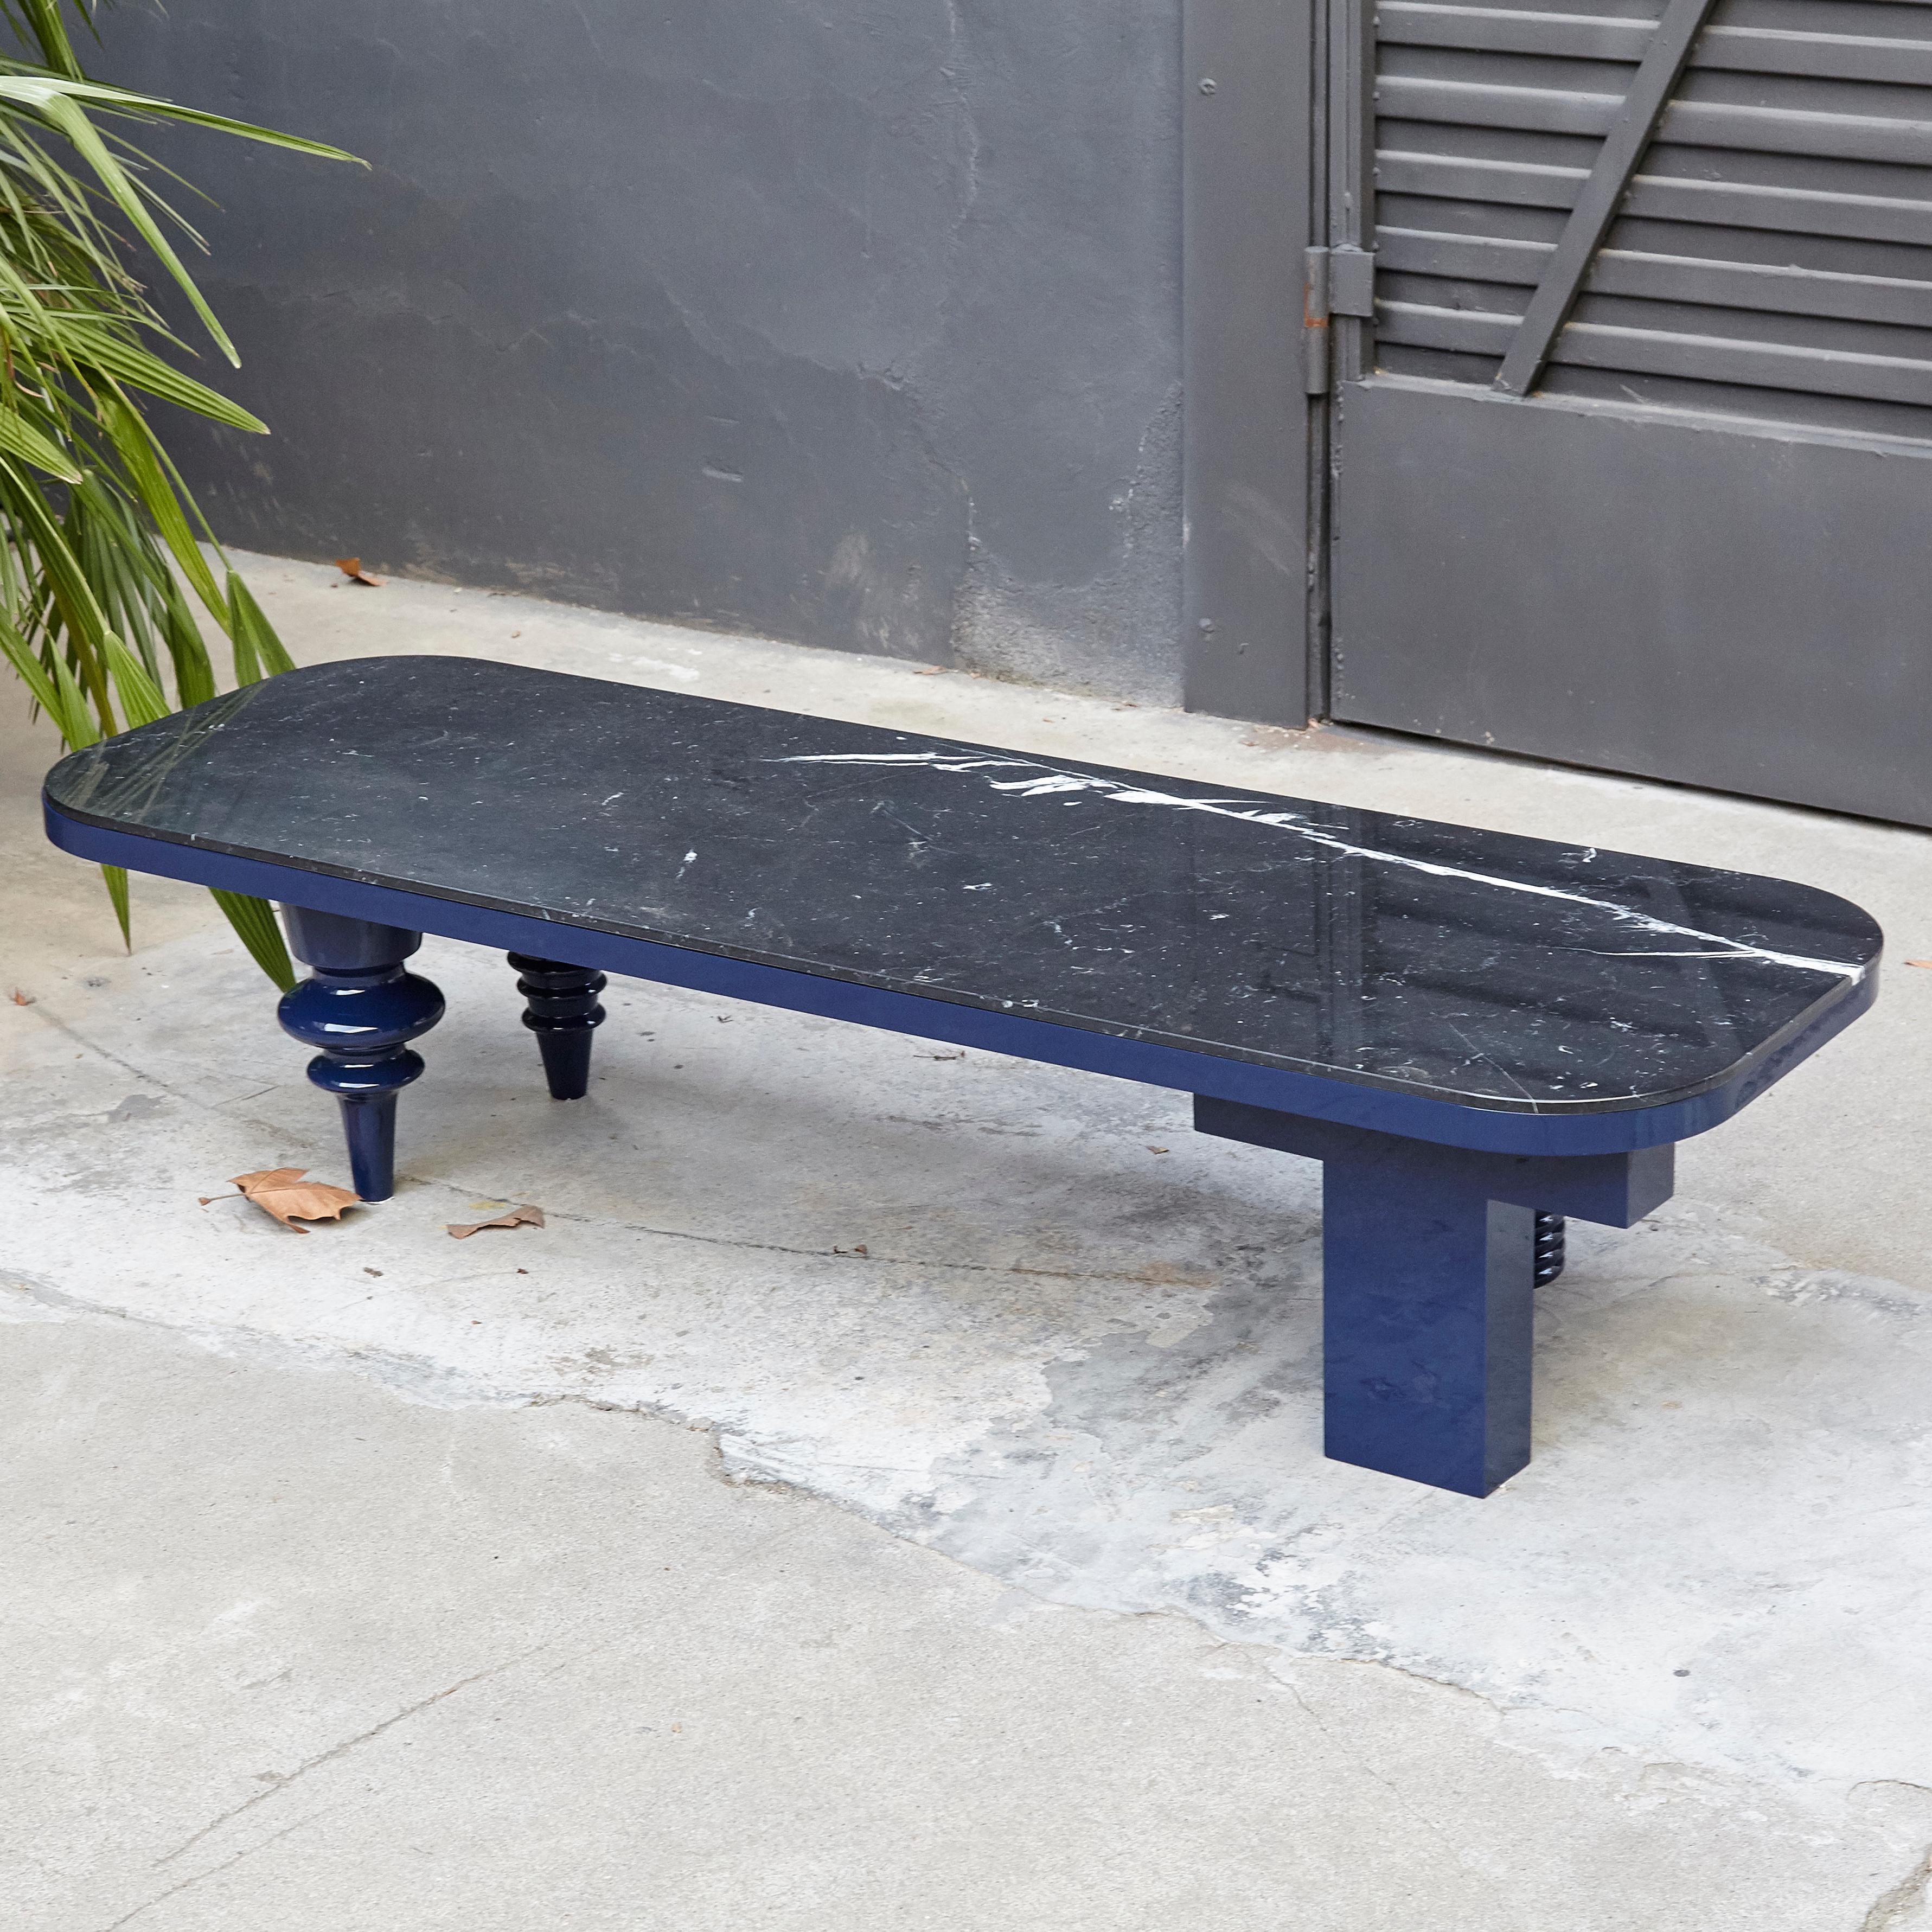 Design by Jaime Hayon, 2016
Manufactured by BD Barcelona.

Low table with rectangular black marble top. The legs have blue Ral5011 lacquered finishes.

Measures: 50 x 150 x H.35 cm.